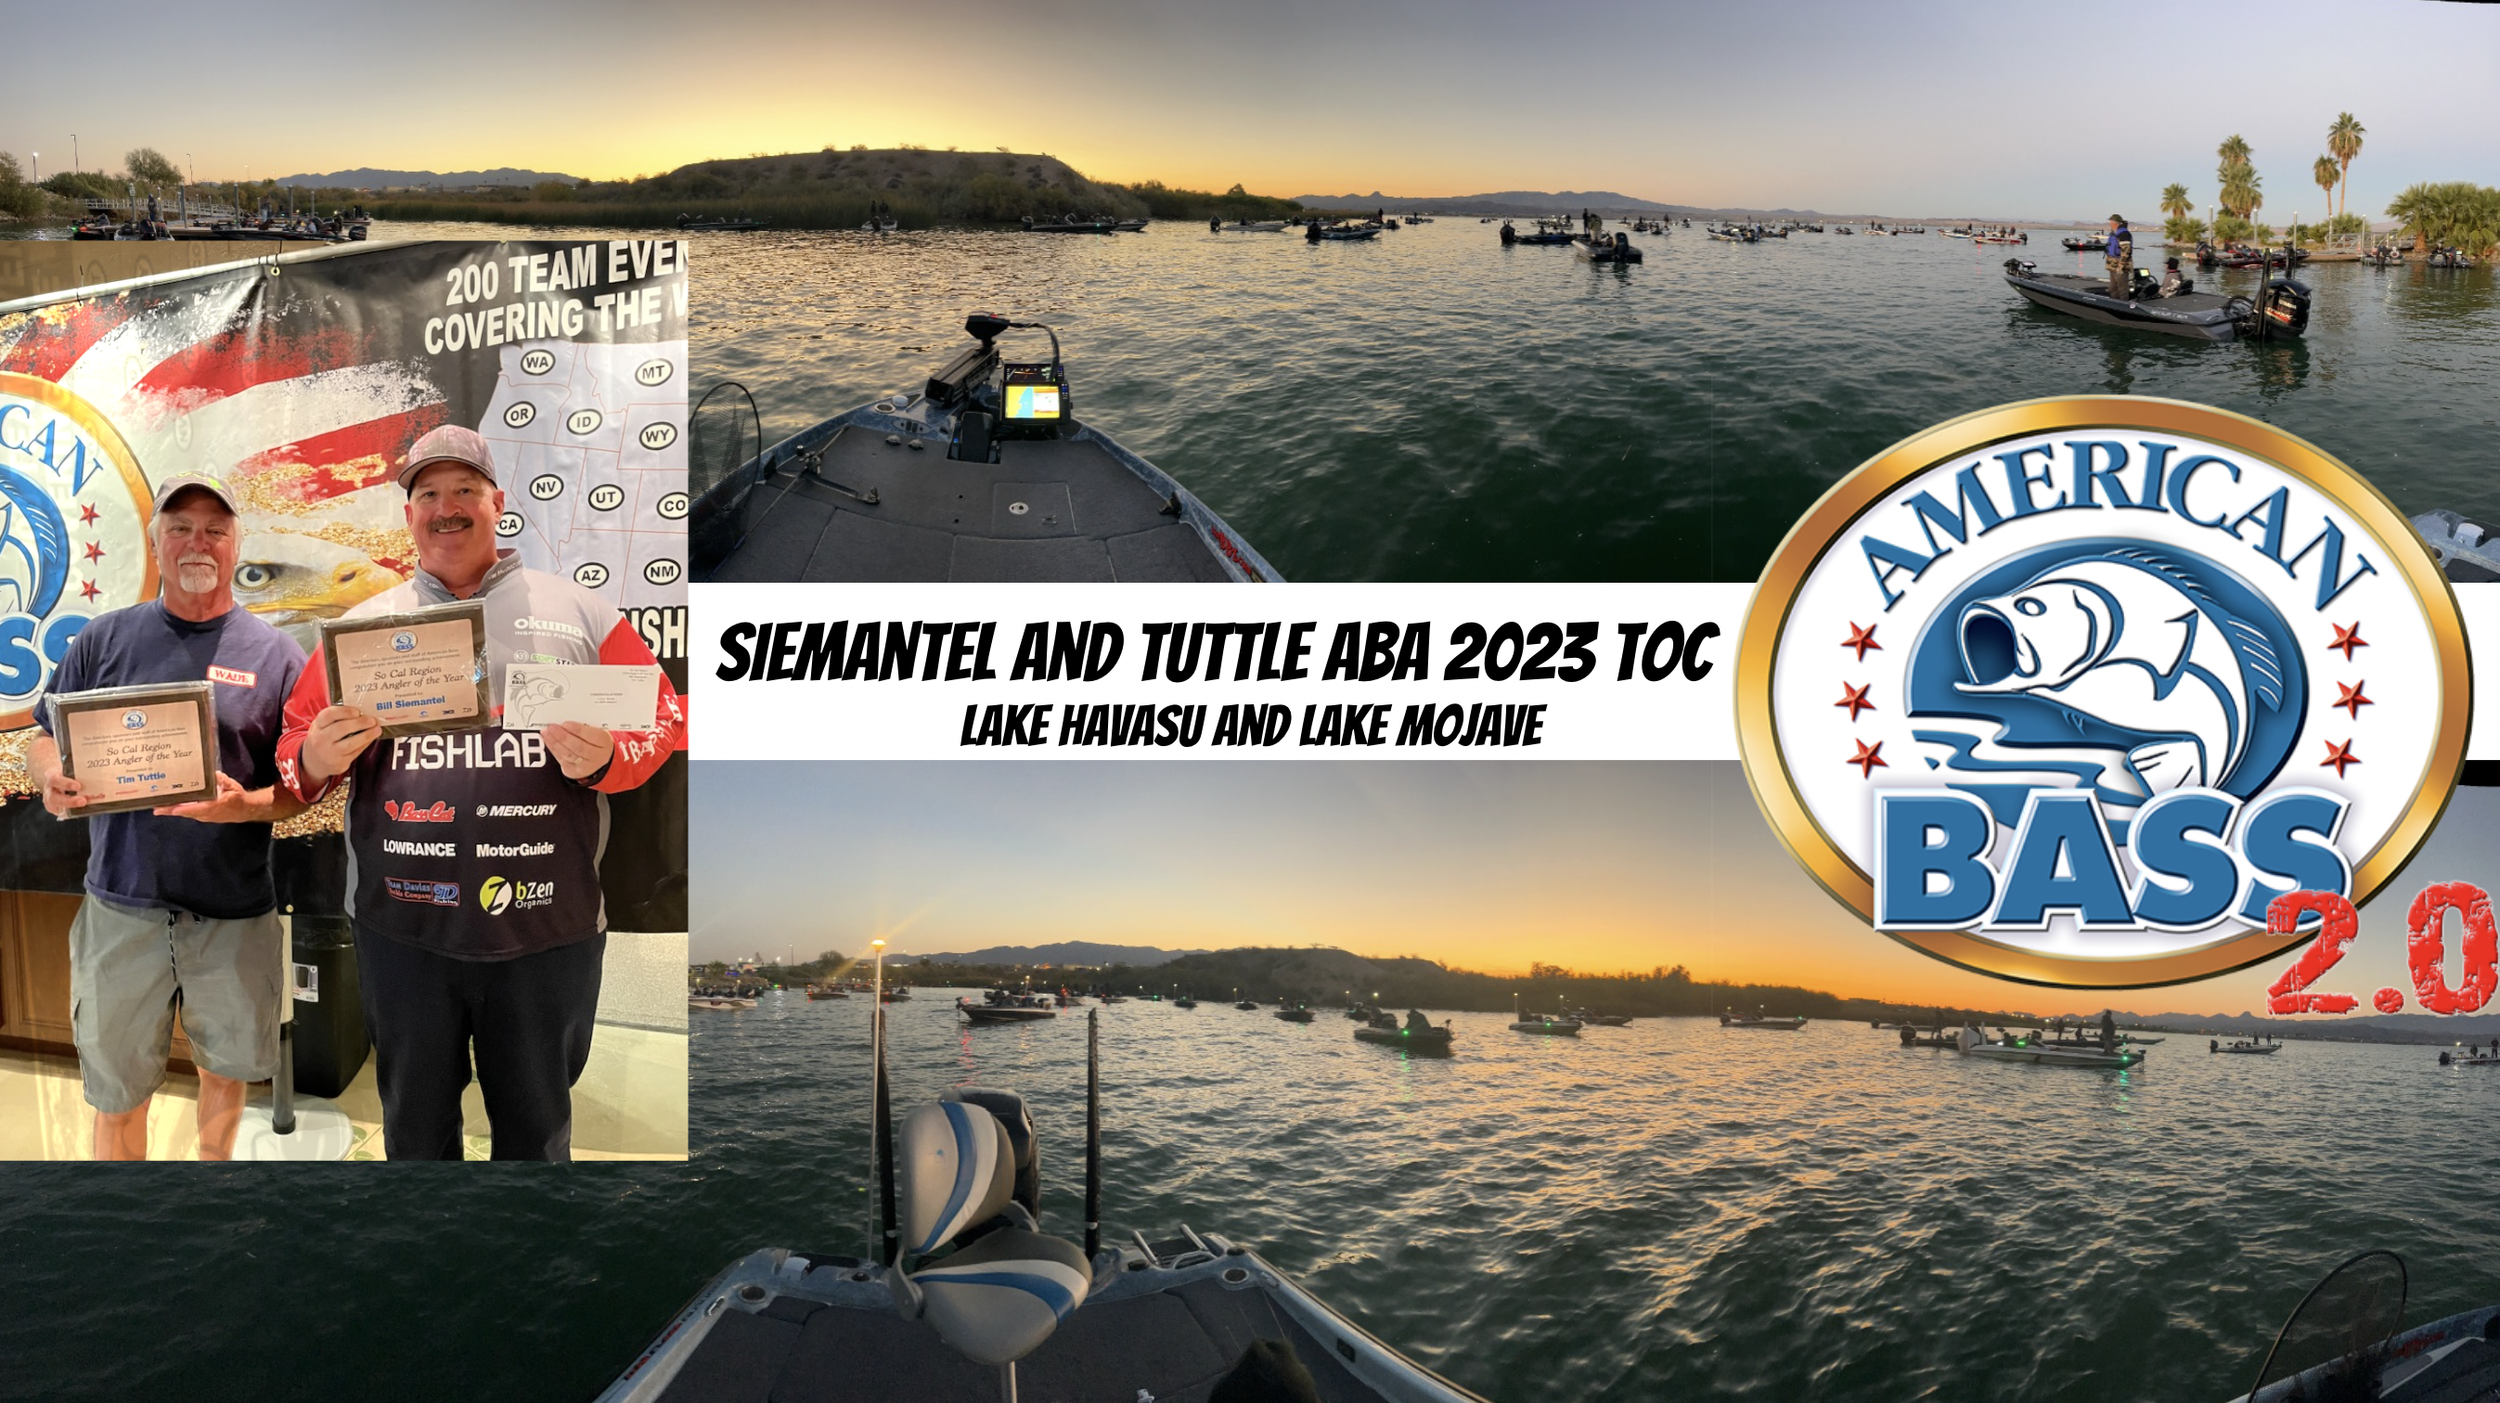 ABA TOC 2023 / BassCat Shootout Siemantel and Tuttle Recap — Welcome To The BBZ  World - theBBZtv - How to Catch Monster Bass & Other Fish - Fishing Videos  & How-To - Bill Siemantel